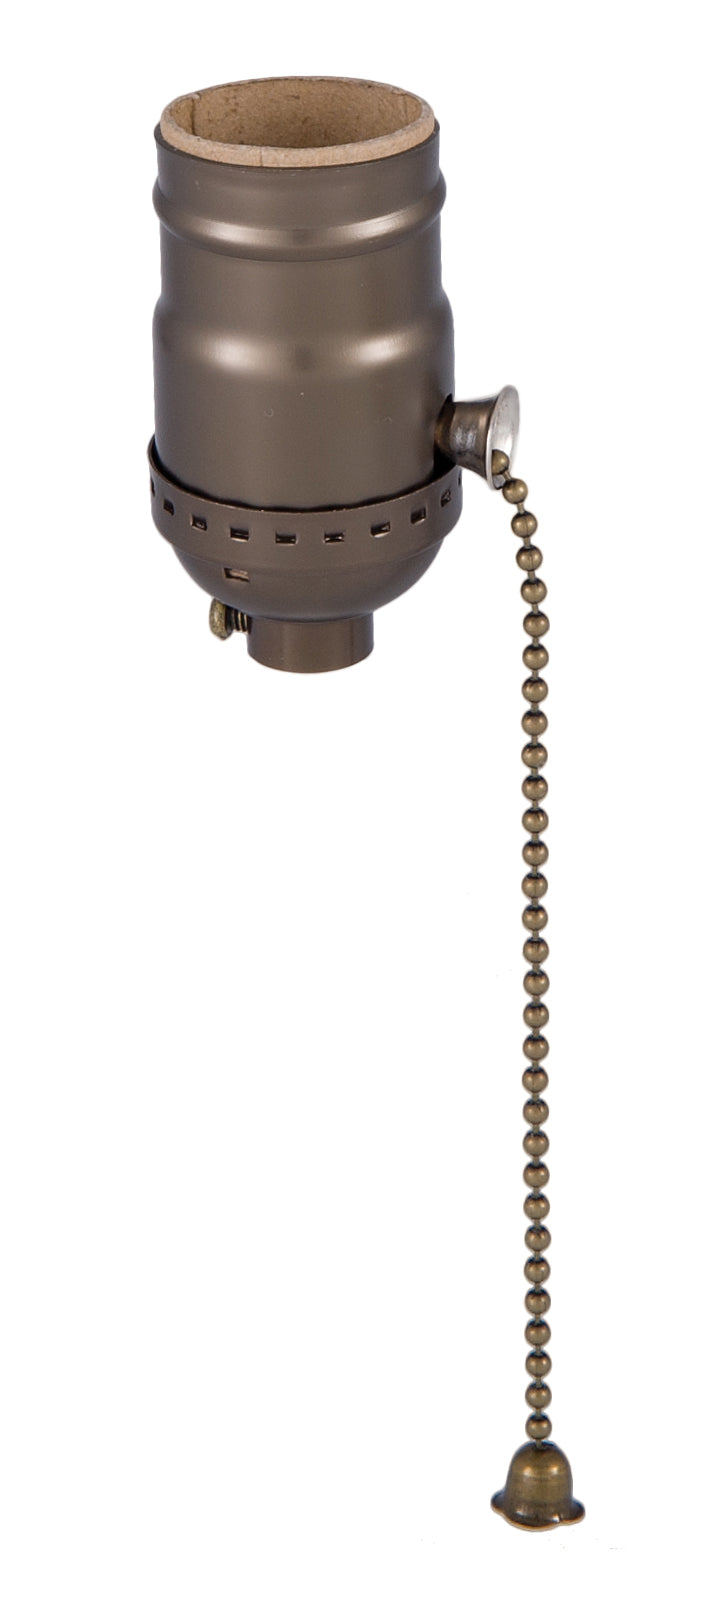 Pull Chain (On-Off) Med. Base Lamp Socket with Antique Brass finish